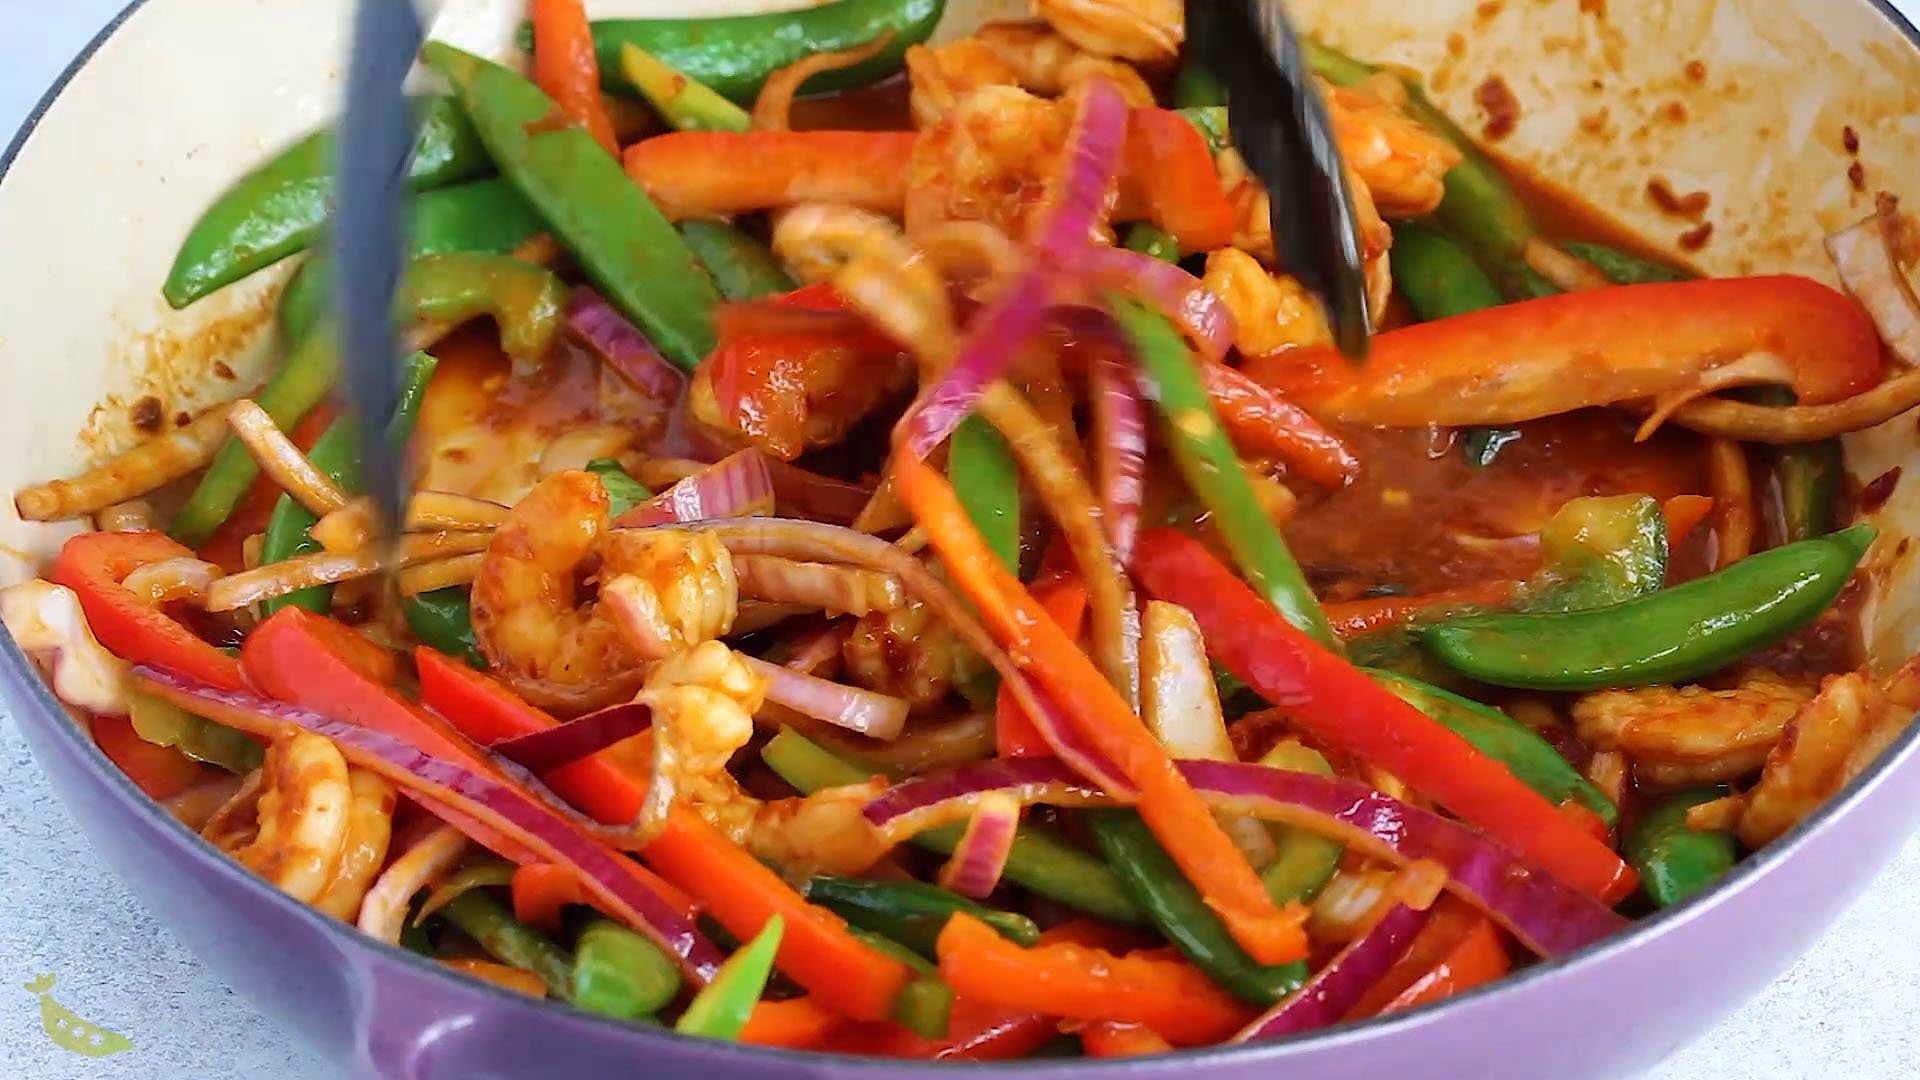 tossing shrimp and vegetables in sweet chili stir fry sauce